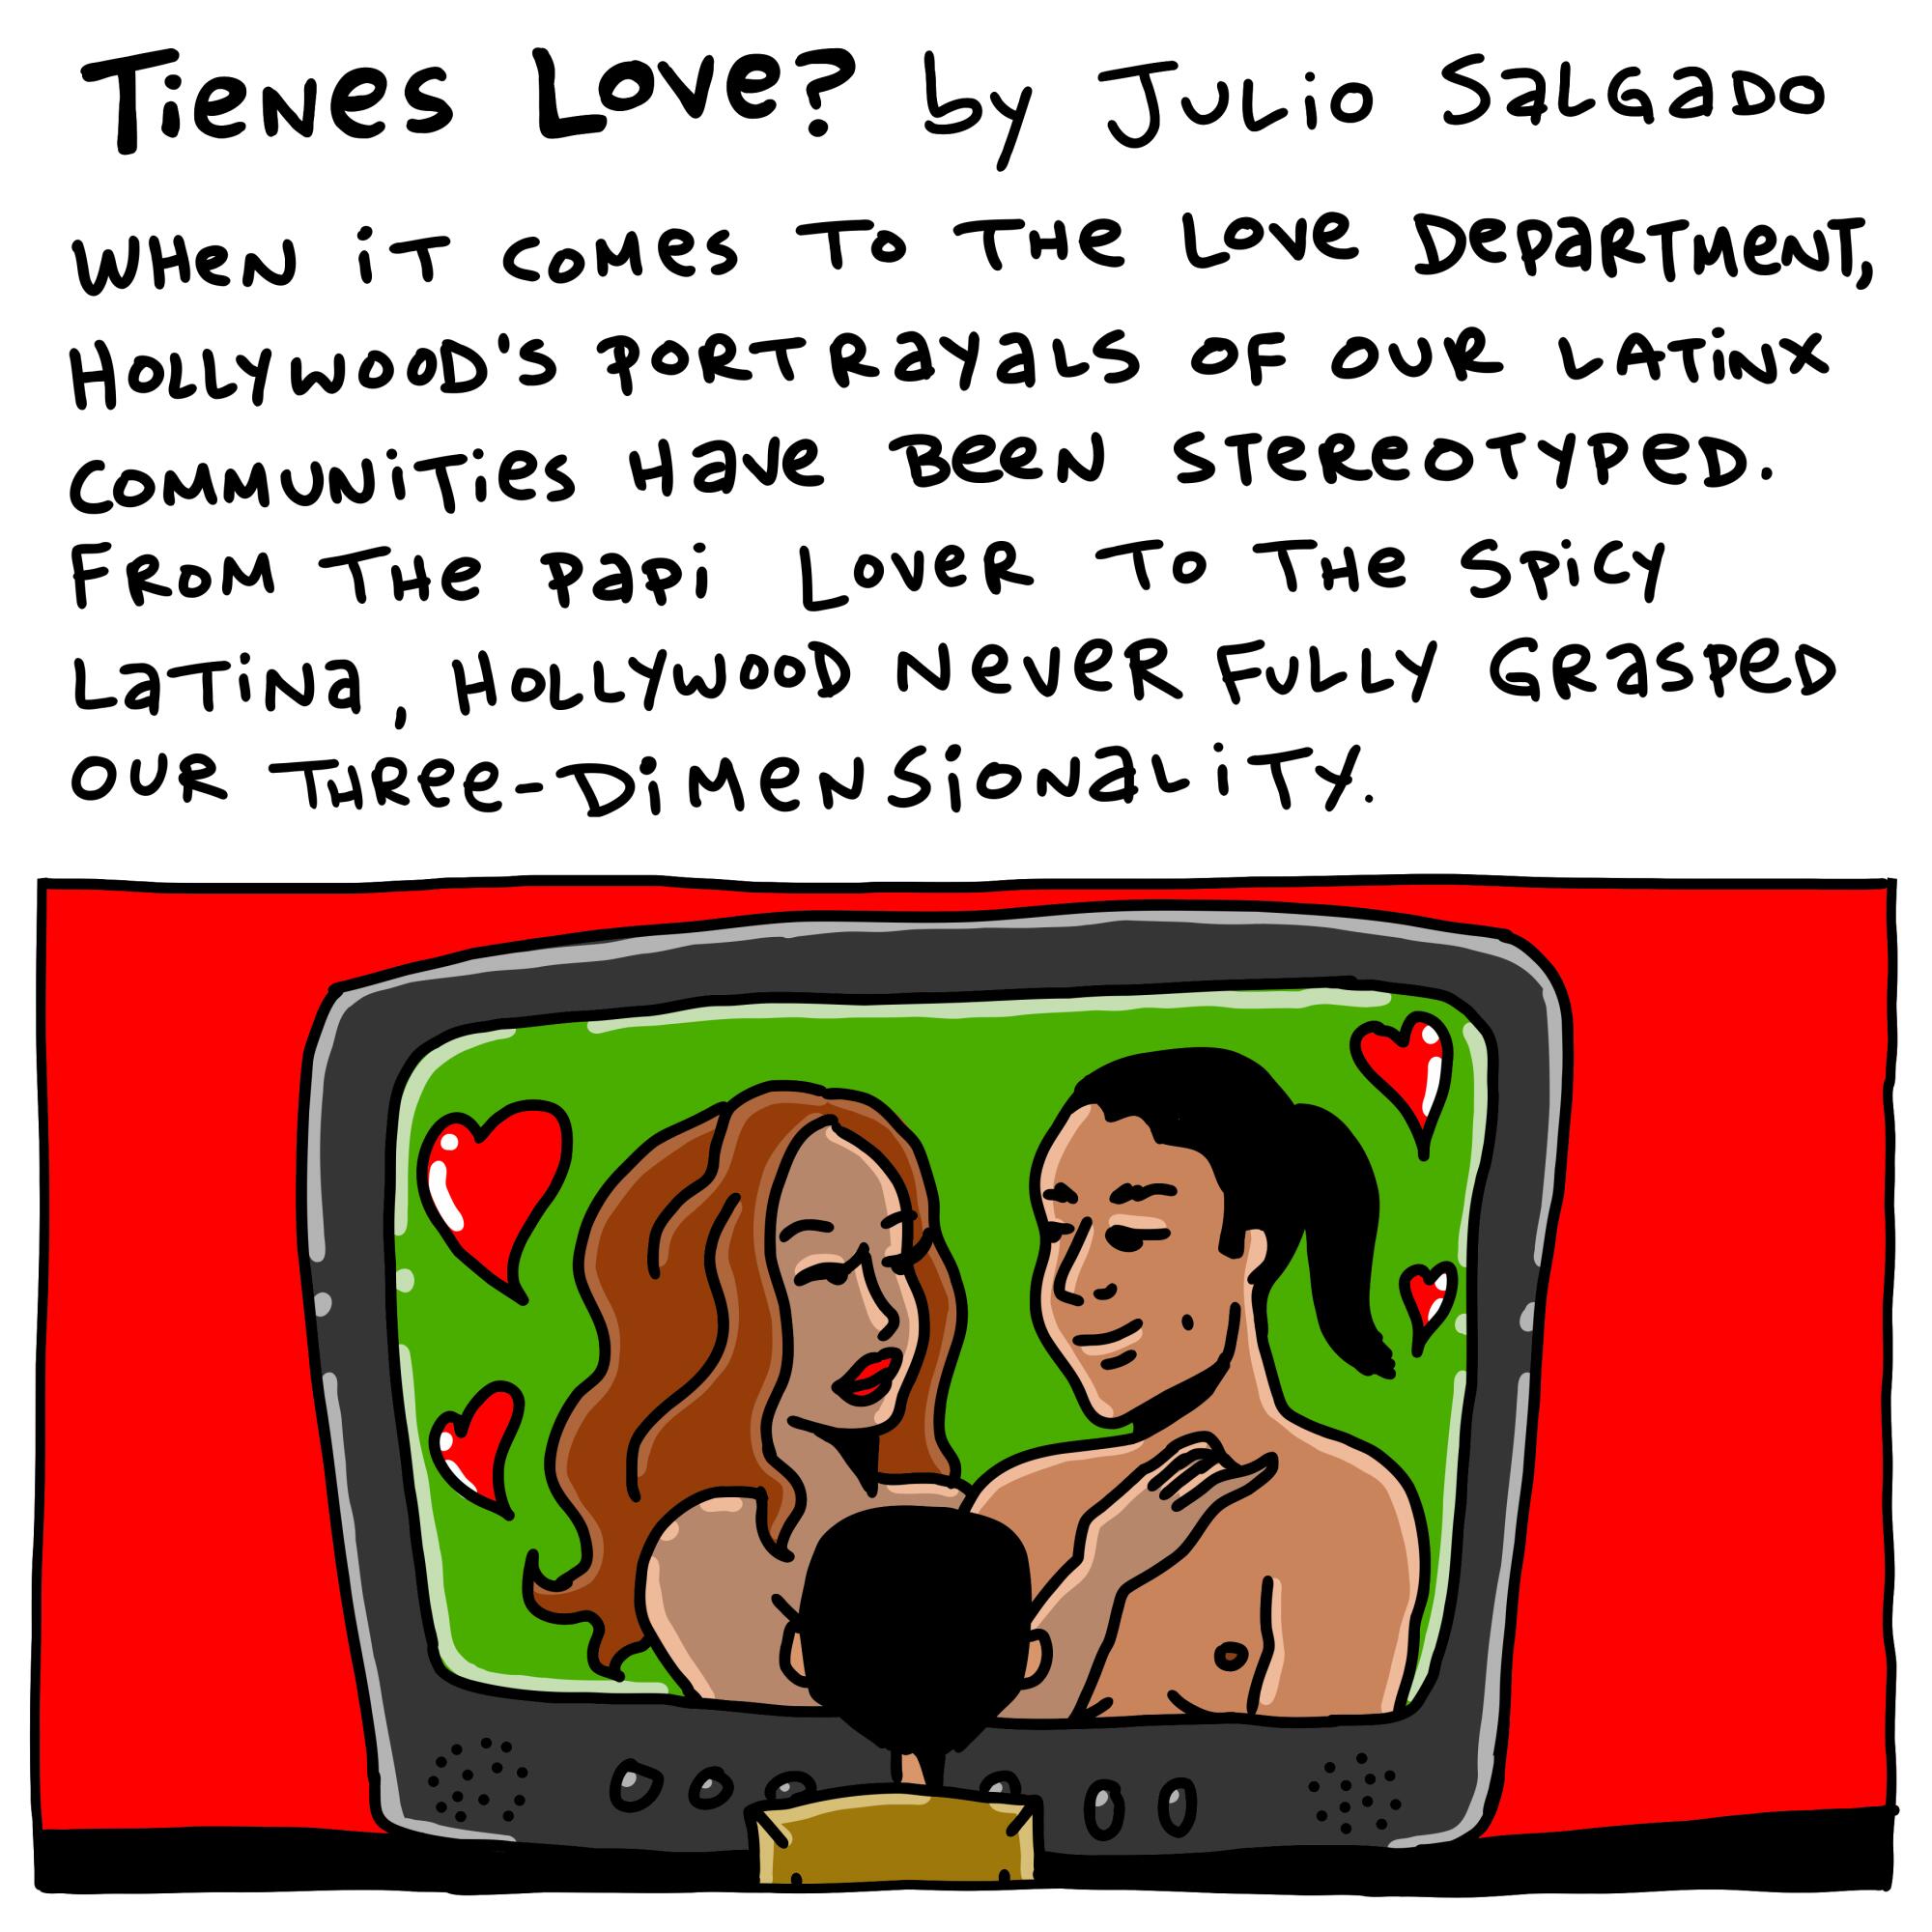 Theres been a stereotype in Hollywood about the portrayals of our Latinx communities when it comes to love. 